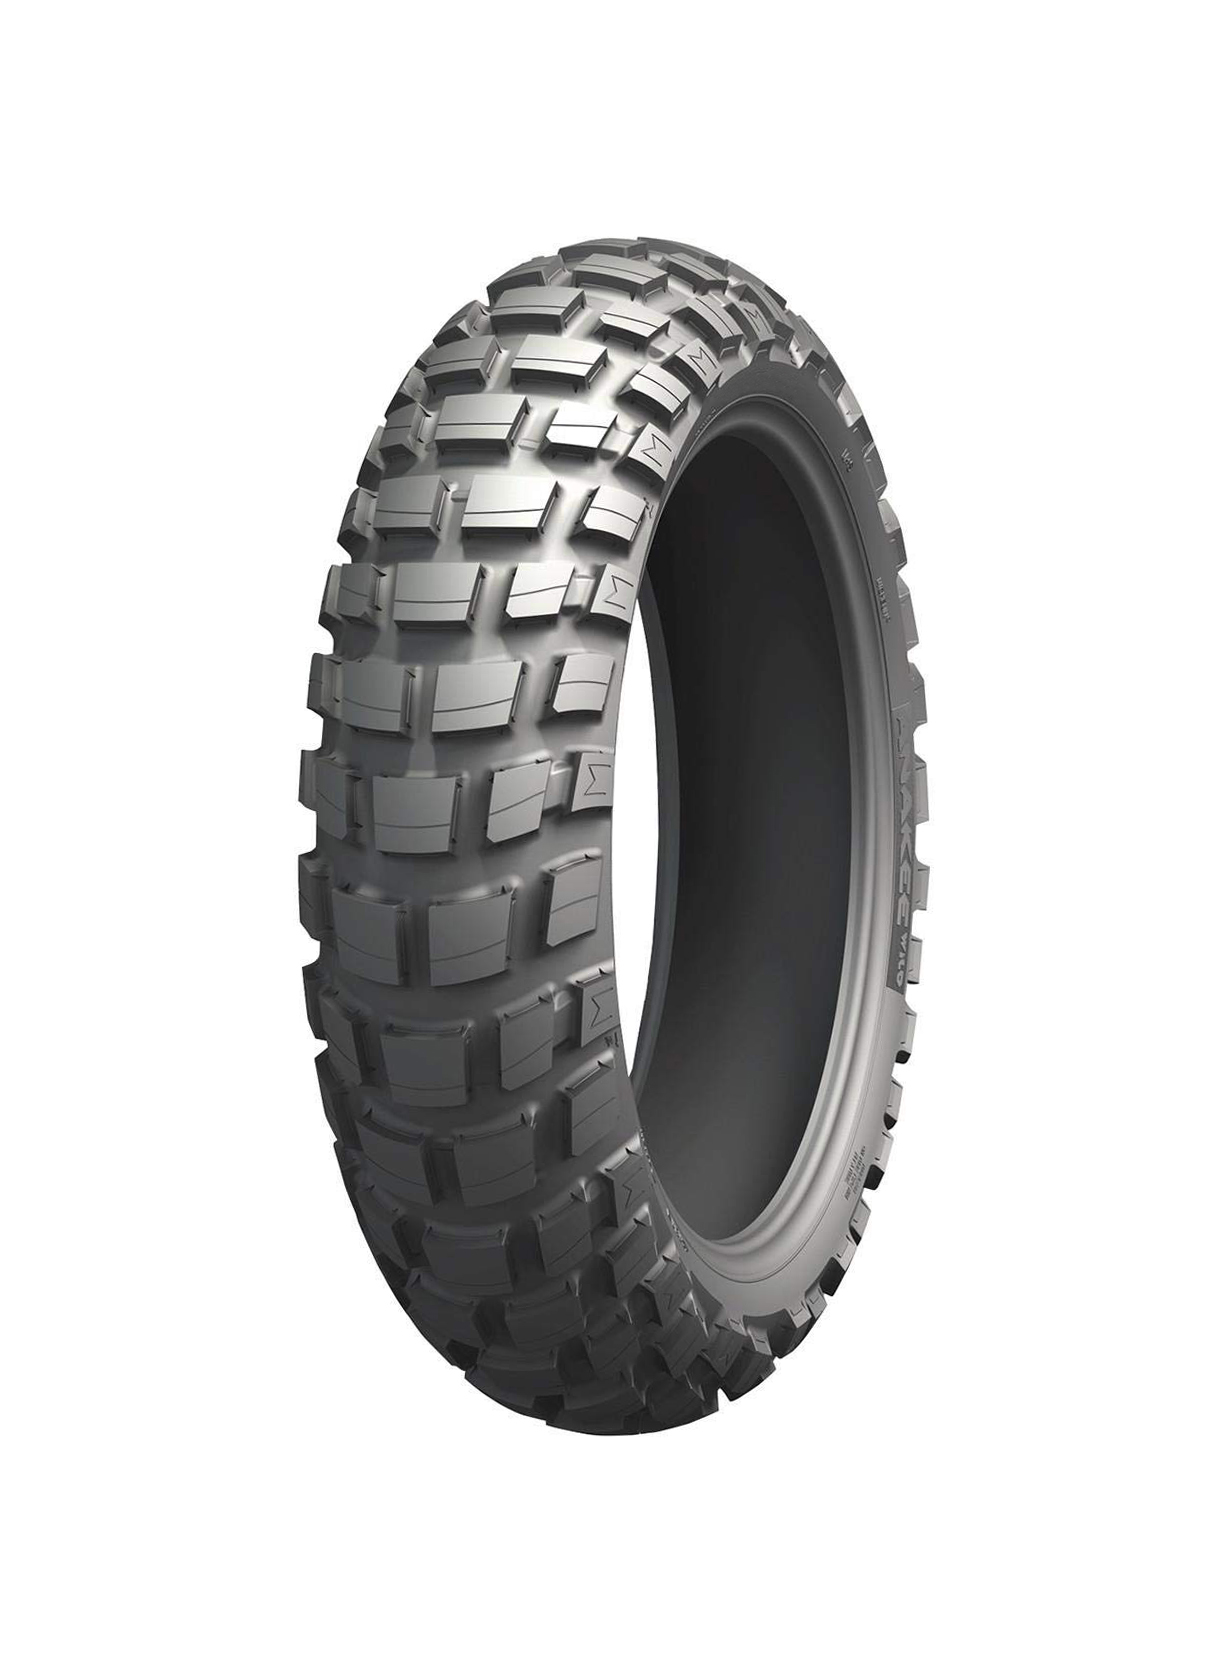 90/90-21 opona MICHELIN ANAKEE WILD FRONT 54R